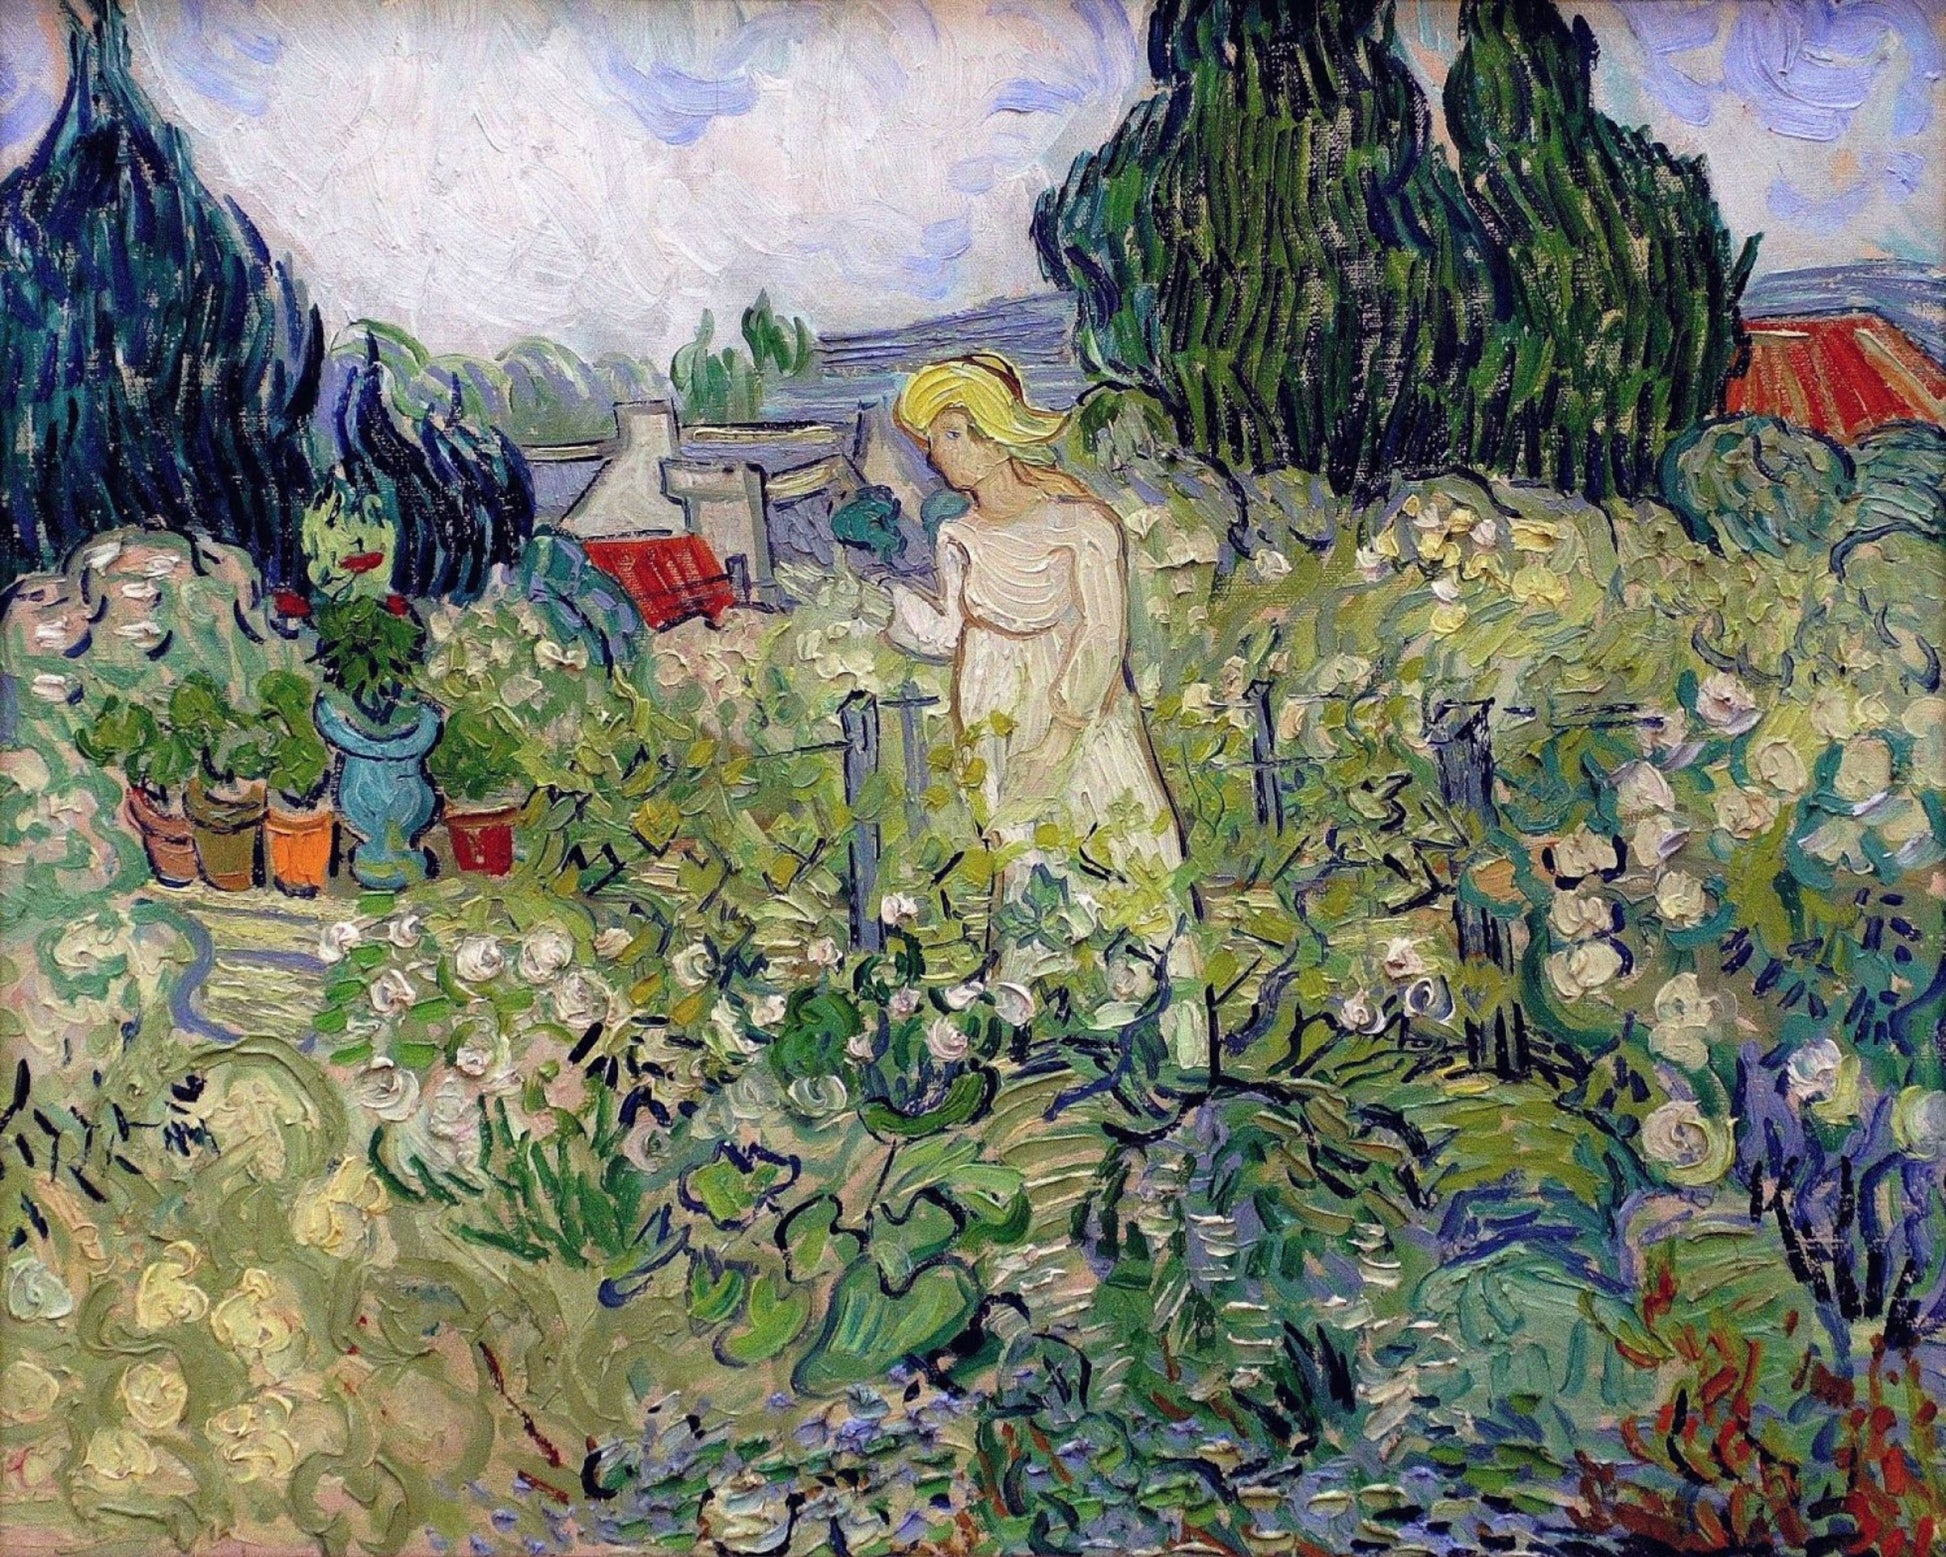 Mademoiselle Gachet in the garden by Vincent Van Gogh - Paint-By-Number Kit